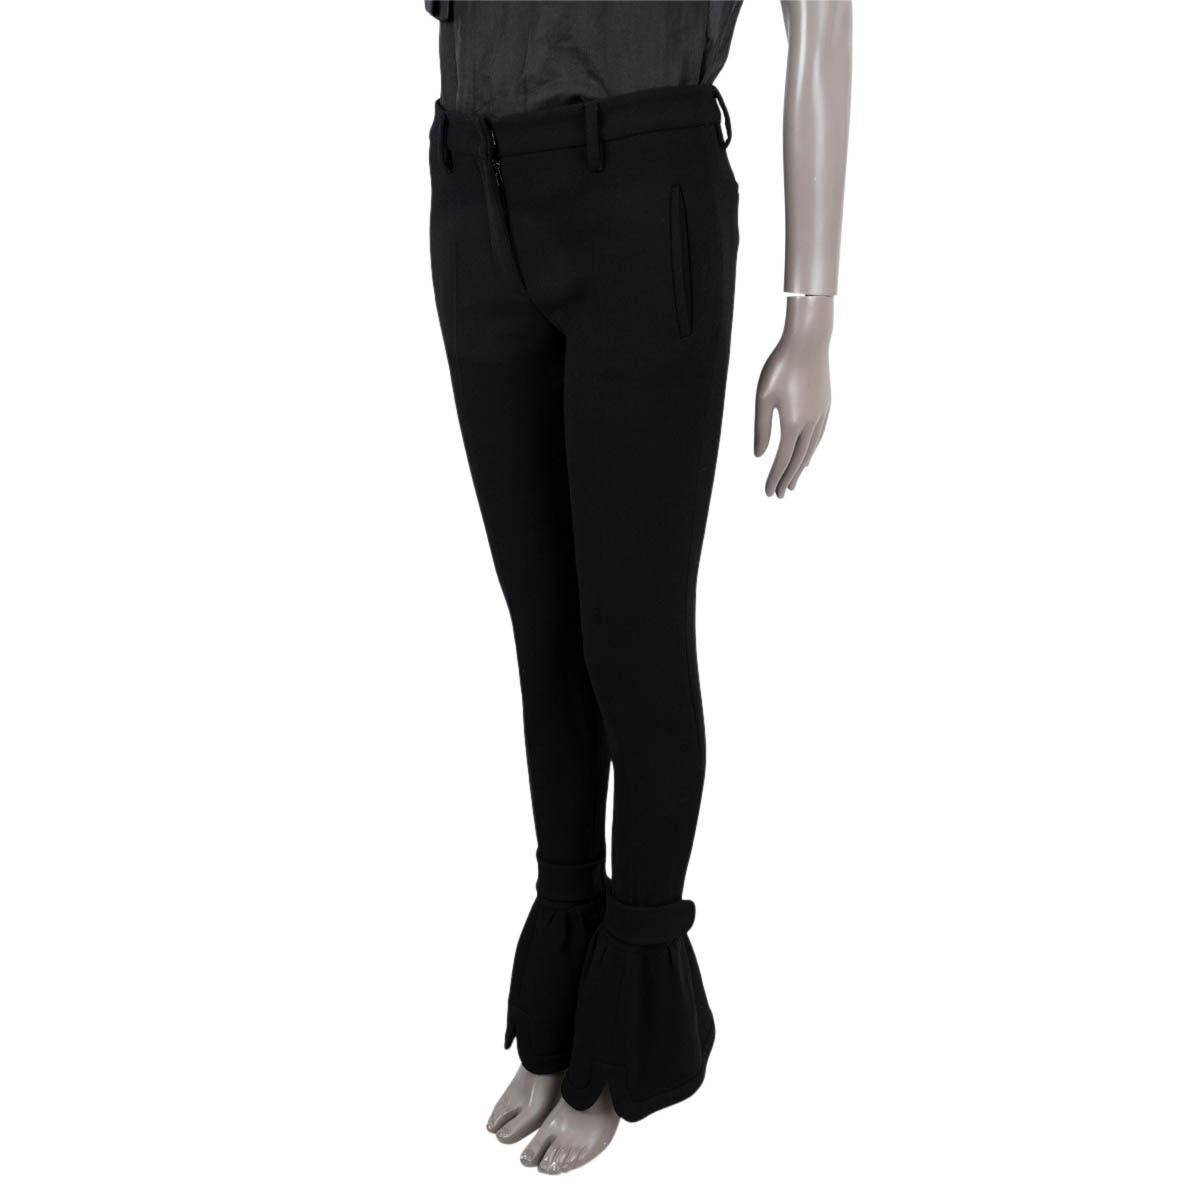 100% authentic Miu Miu skinny pants in black wool (100%). Feature boot-cut legs with ankle straps, two side slit pockets on the front and two sewn shut slit pockets at the back, with belt loops. Open with a hook and a zipper on the front. Lined in